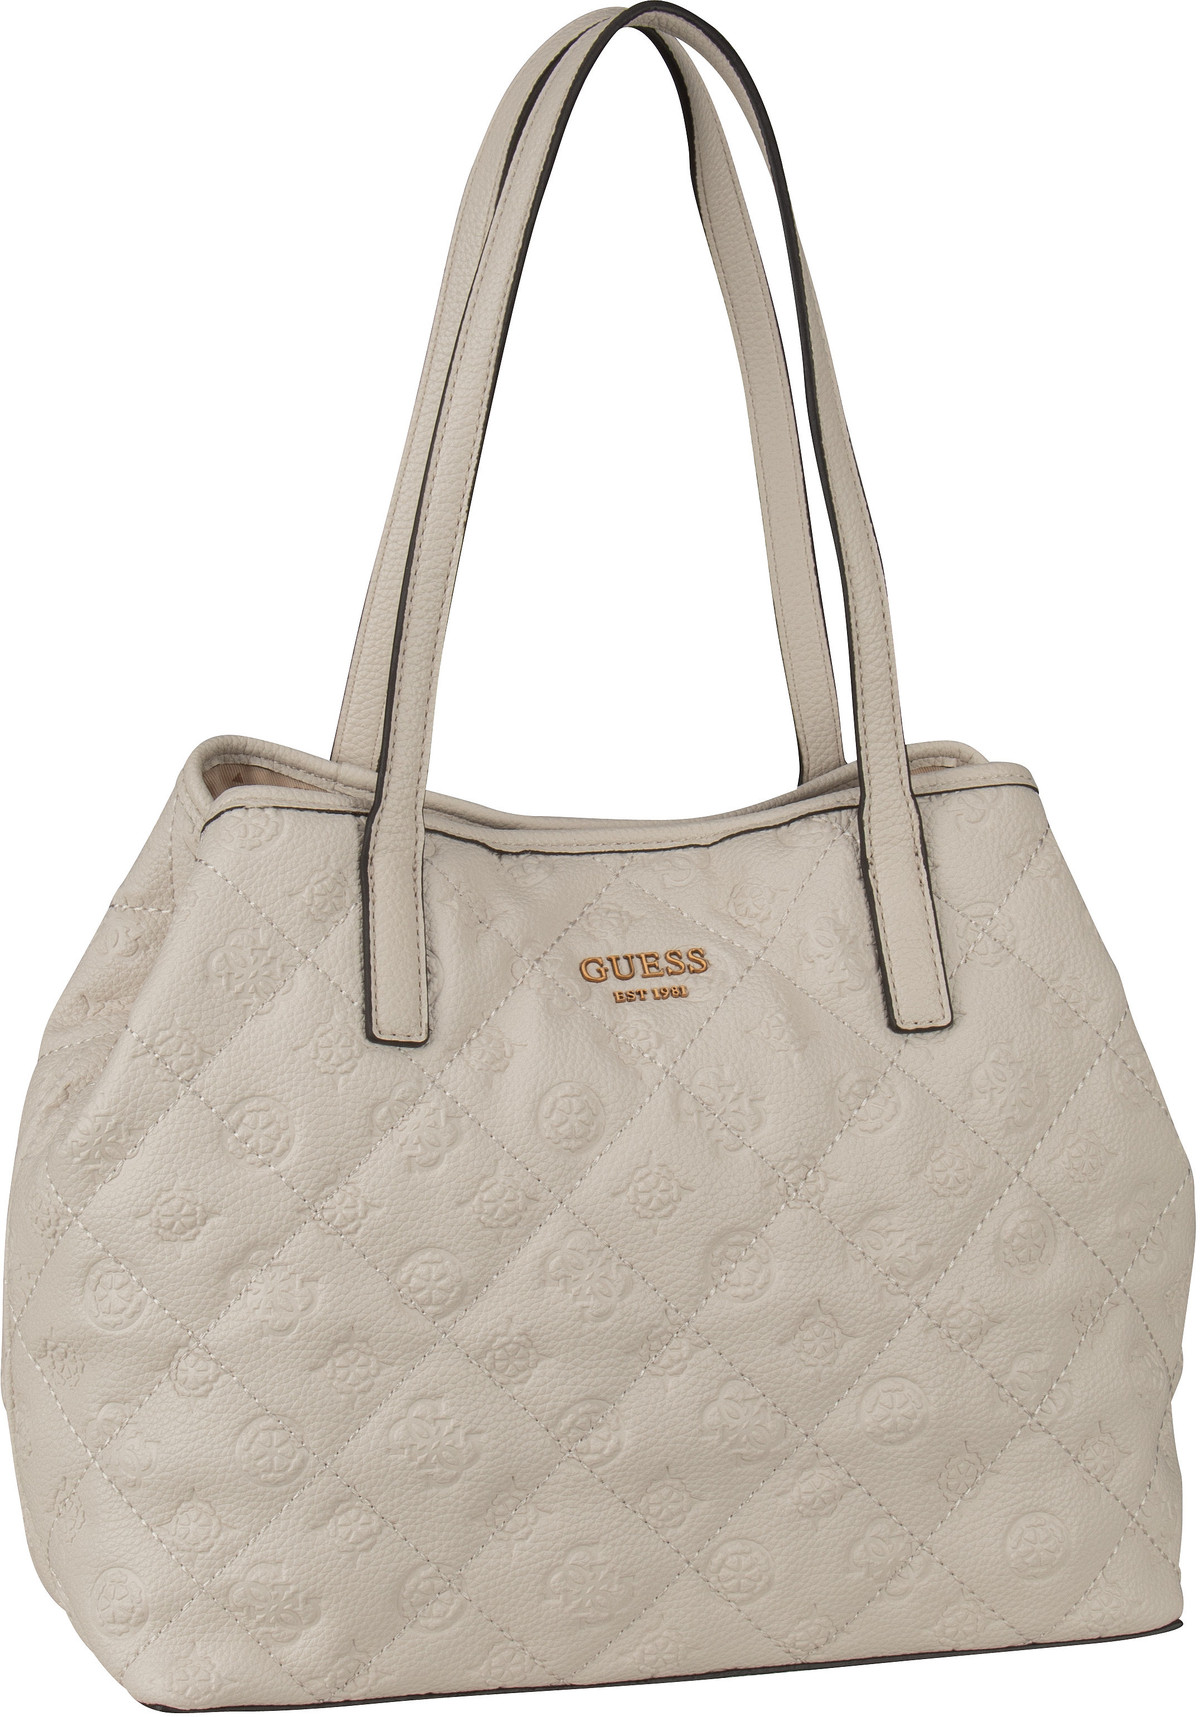 Guess Guess Vikky Tote Quilted in Beige (15.6 Liter), Shopper